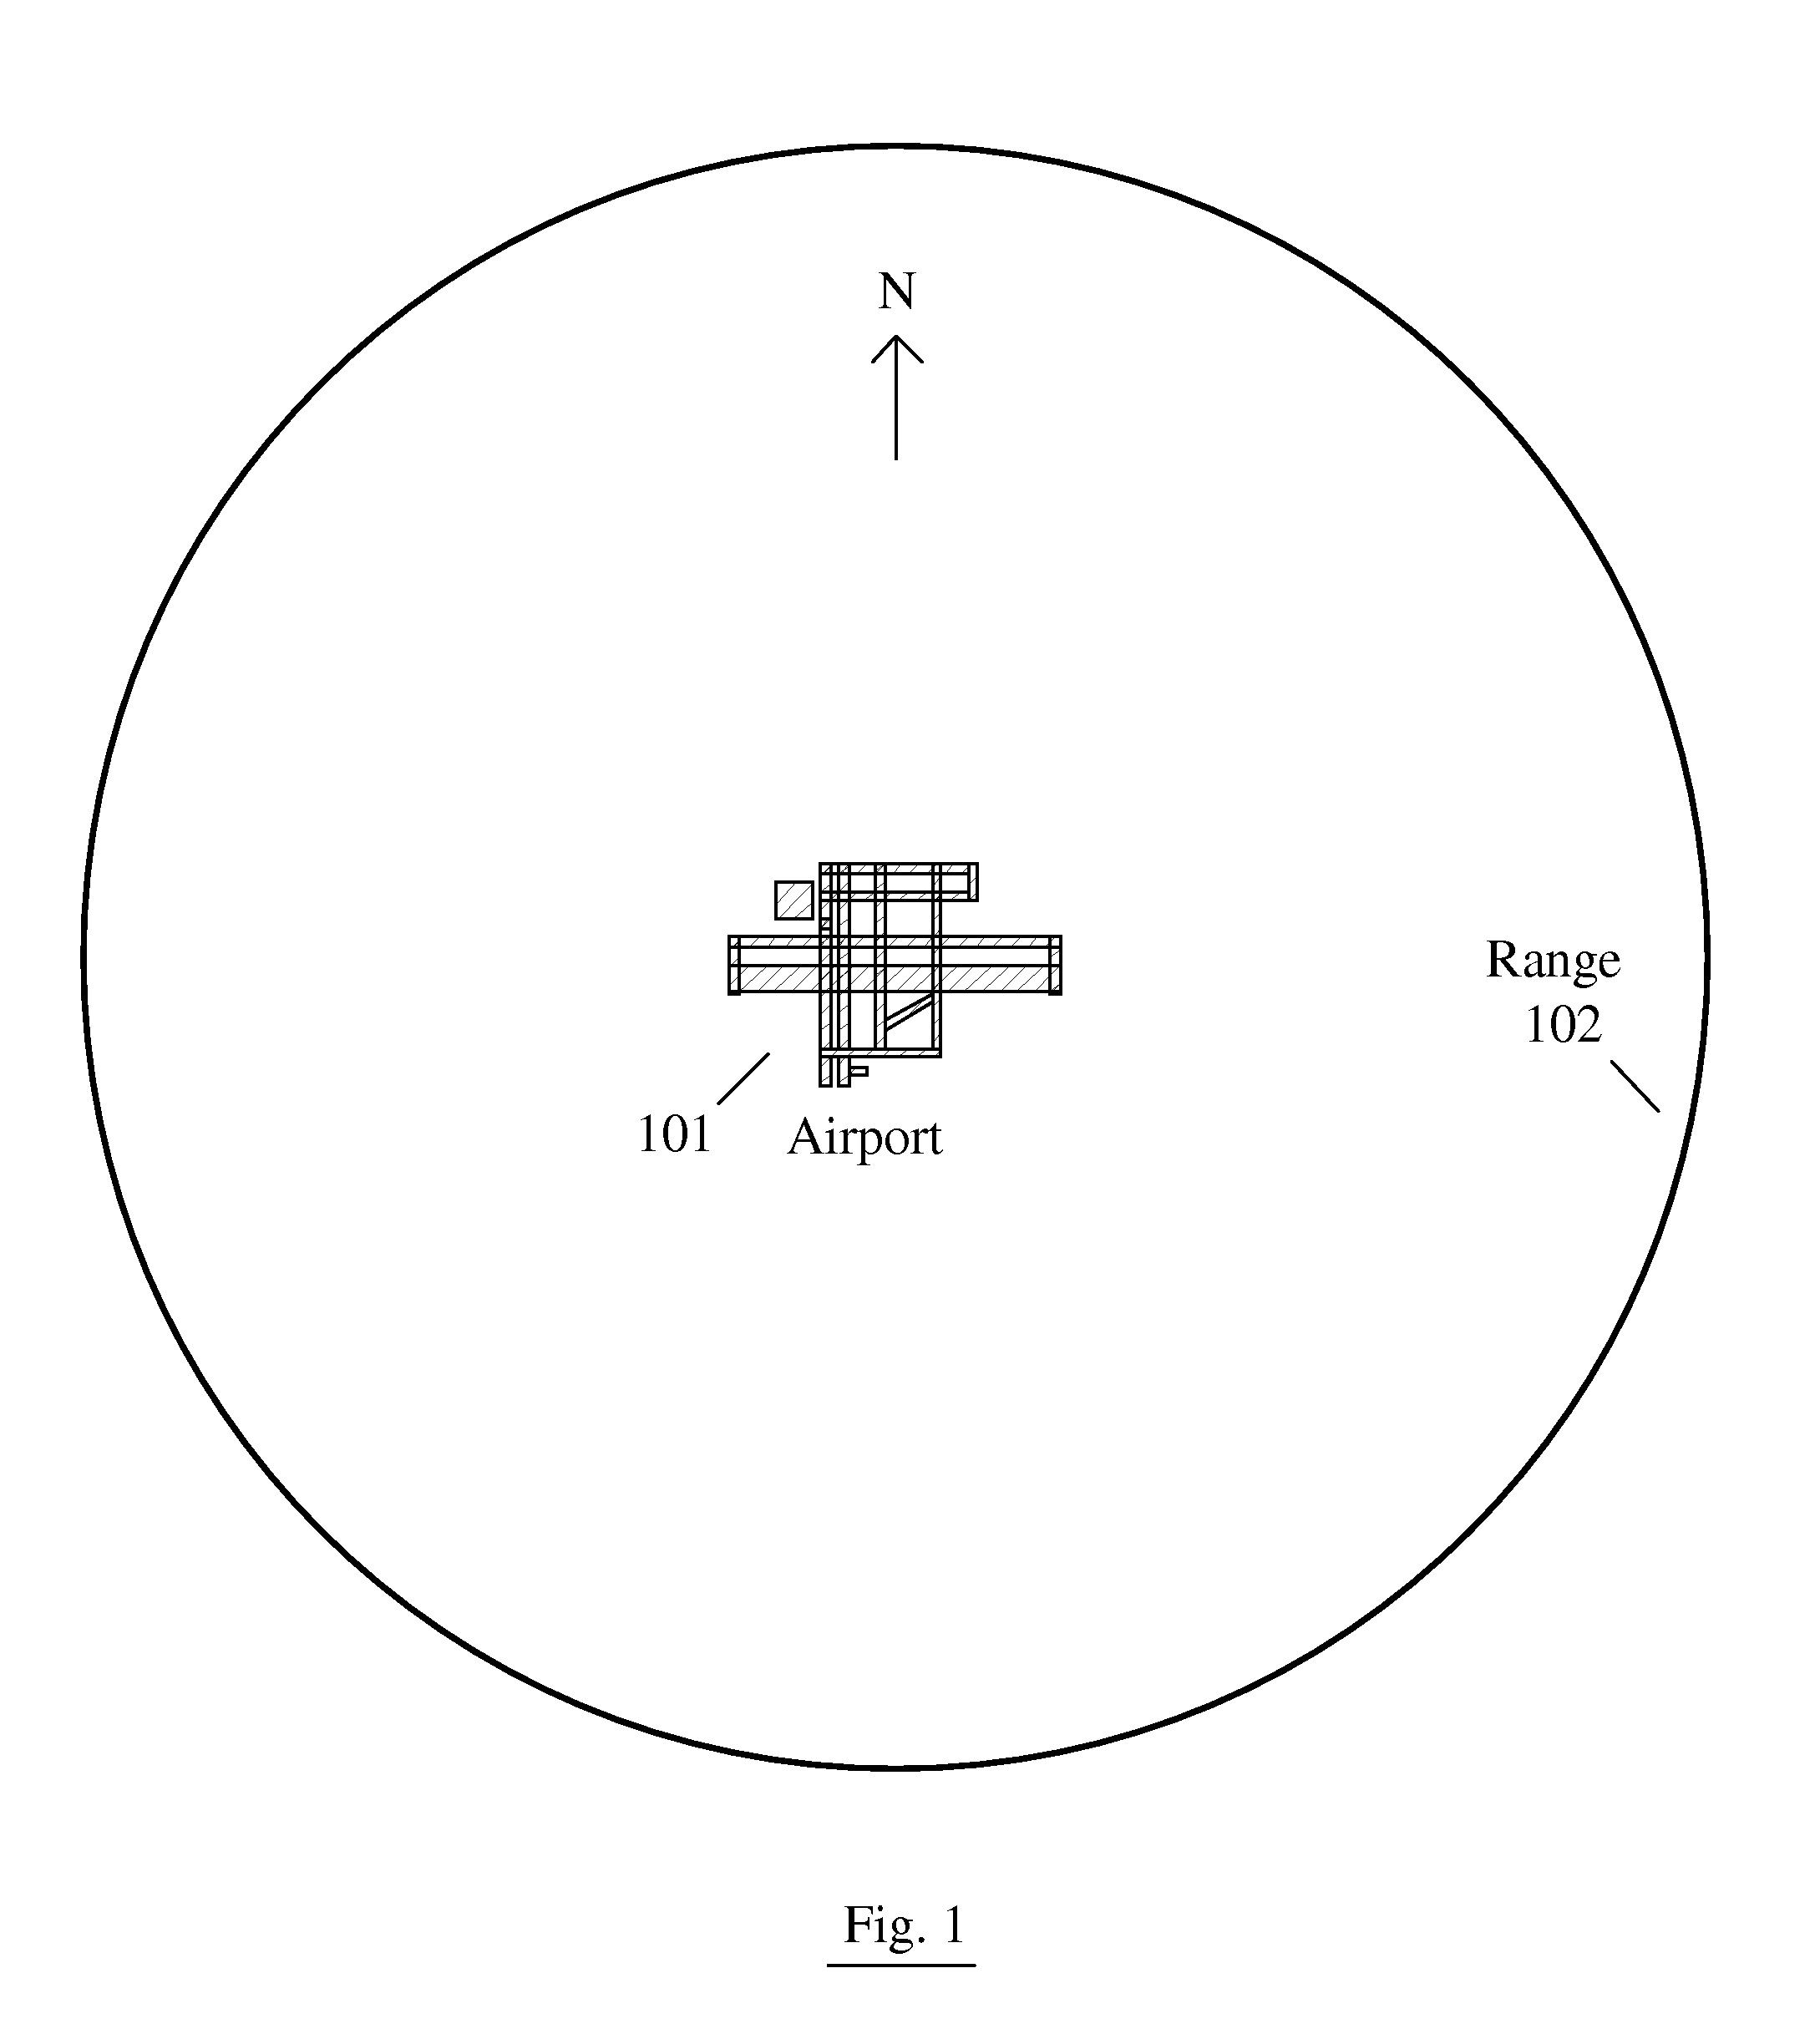 System and Method For Safely Flying Unmanned Aerial Vehicles in Civilian Airspace